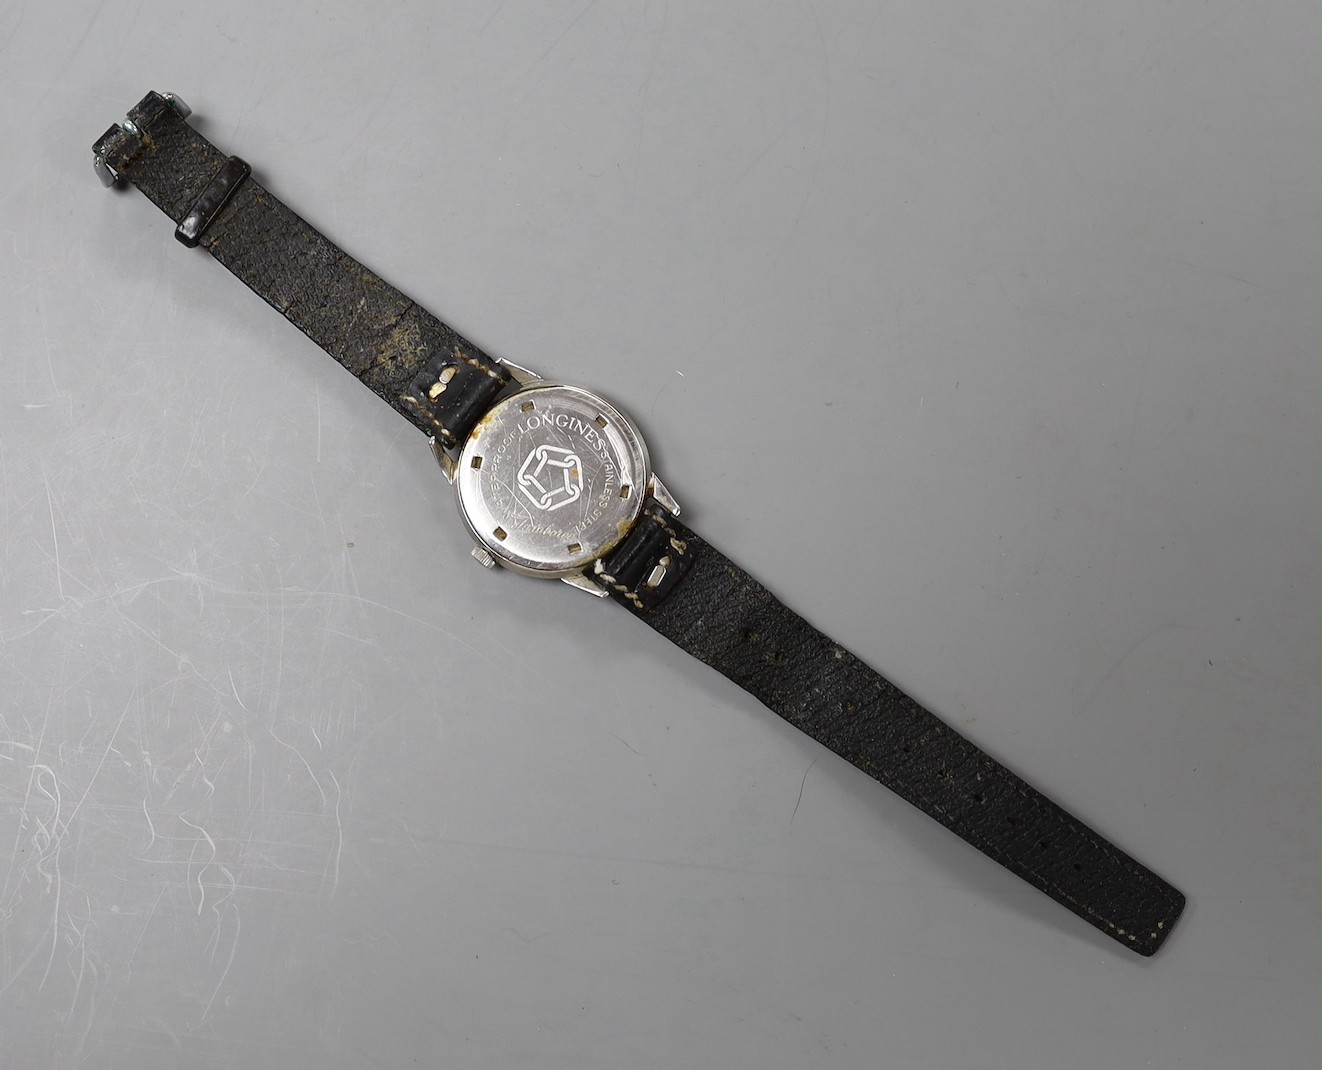 A gentleman's stainless steel Longines Jamboree manual wind wrist watch, on a later leather strap.